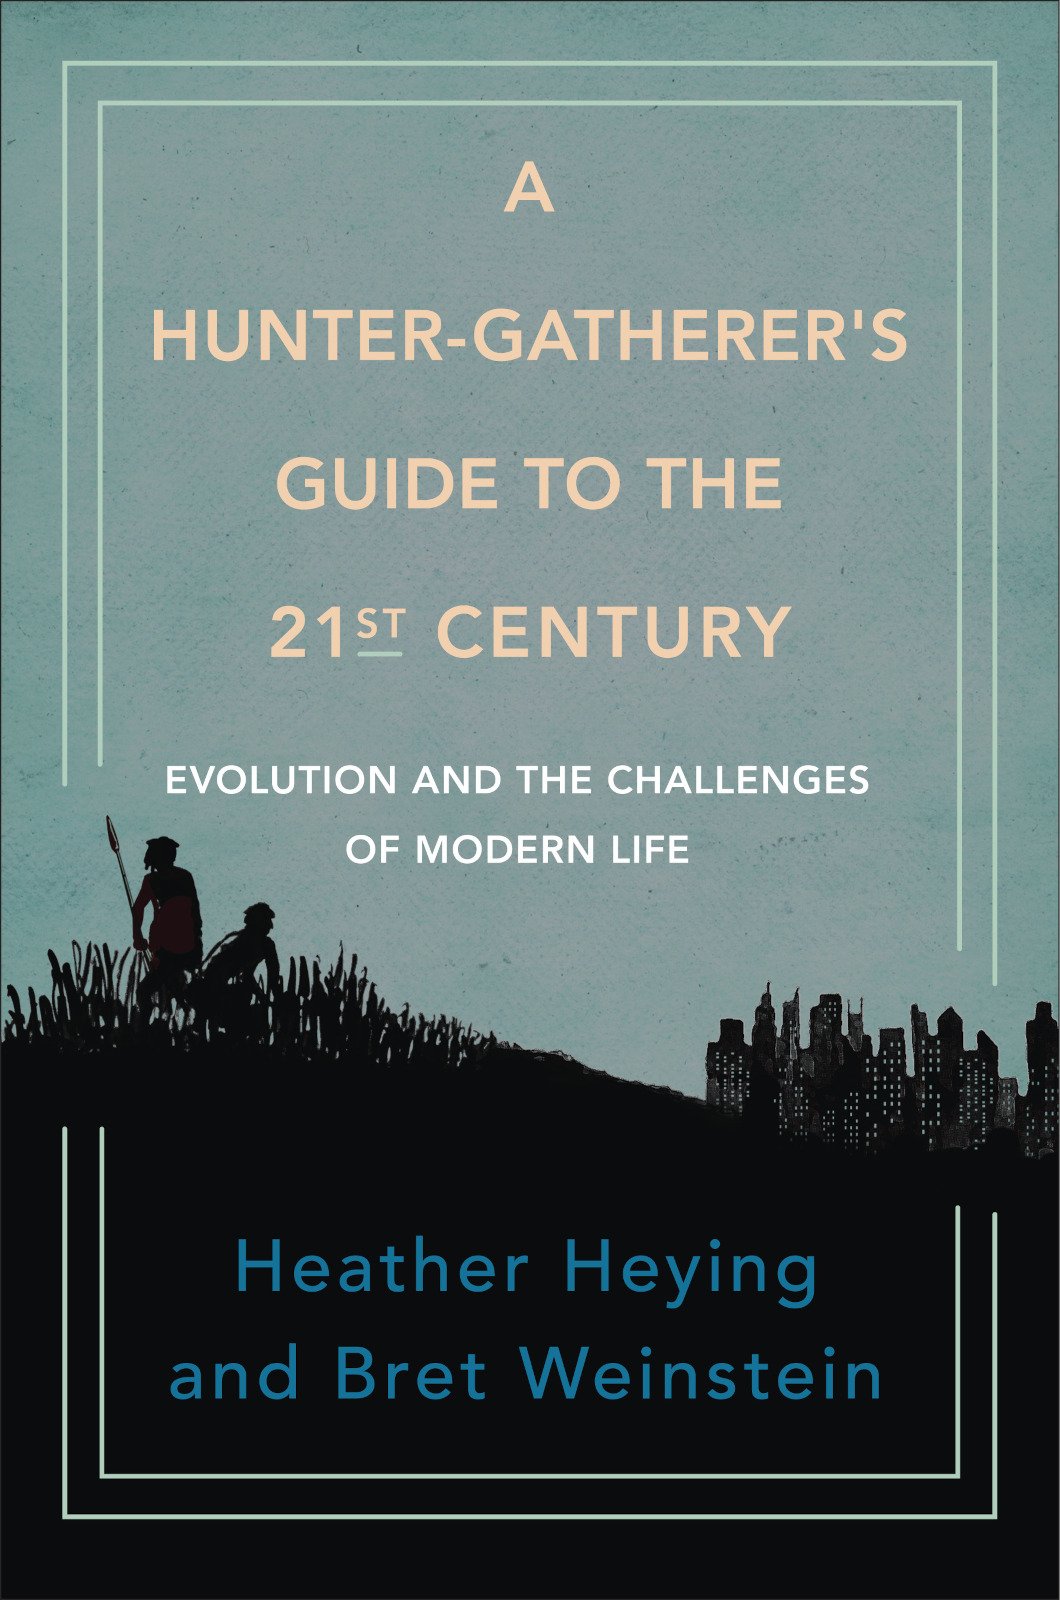 A_Hunter_Gatherers_Guide_To_The_21st_Century_May21-optimized.jpeg